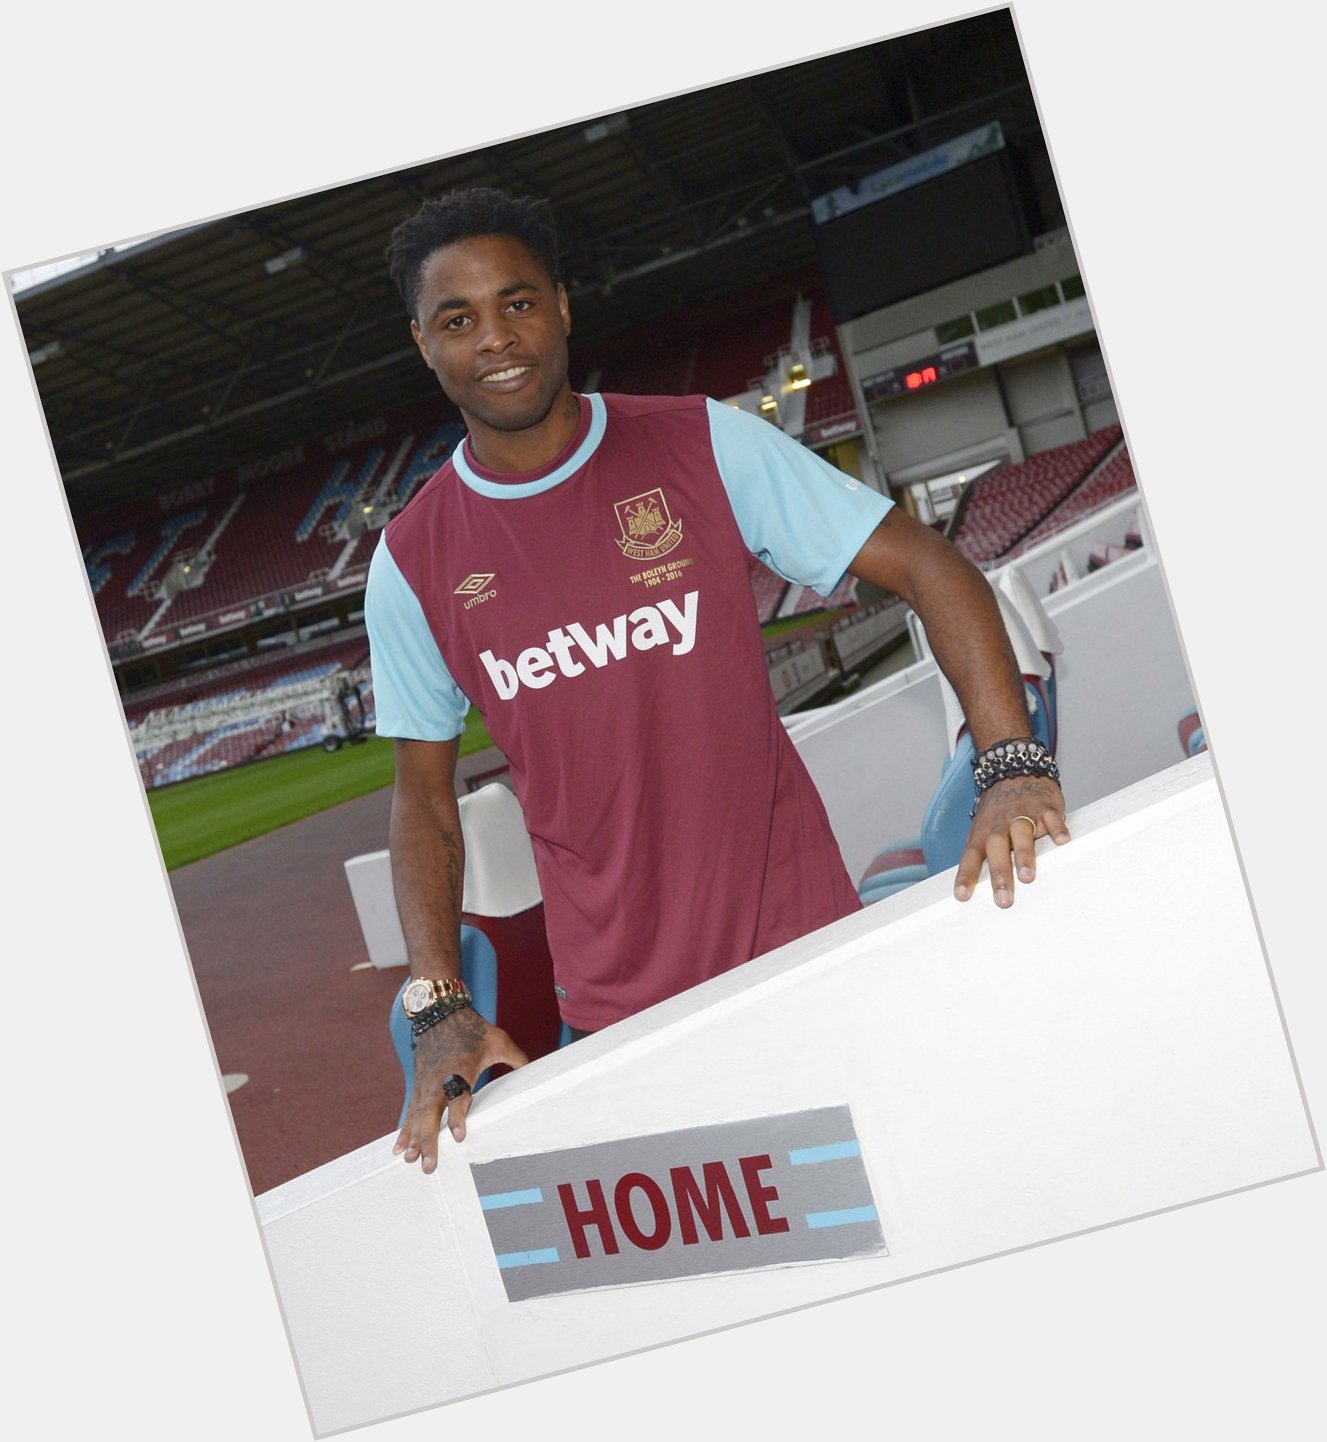 HAPPY BIRTHDAY! Wishing a very happy 28th birthday to Alex Song from everyone at the Club! 